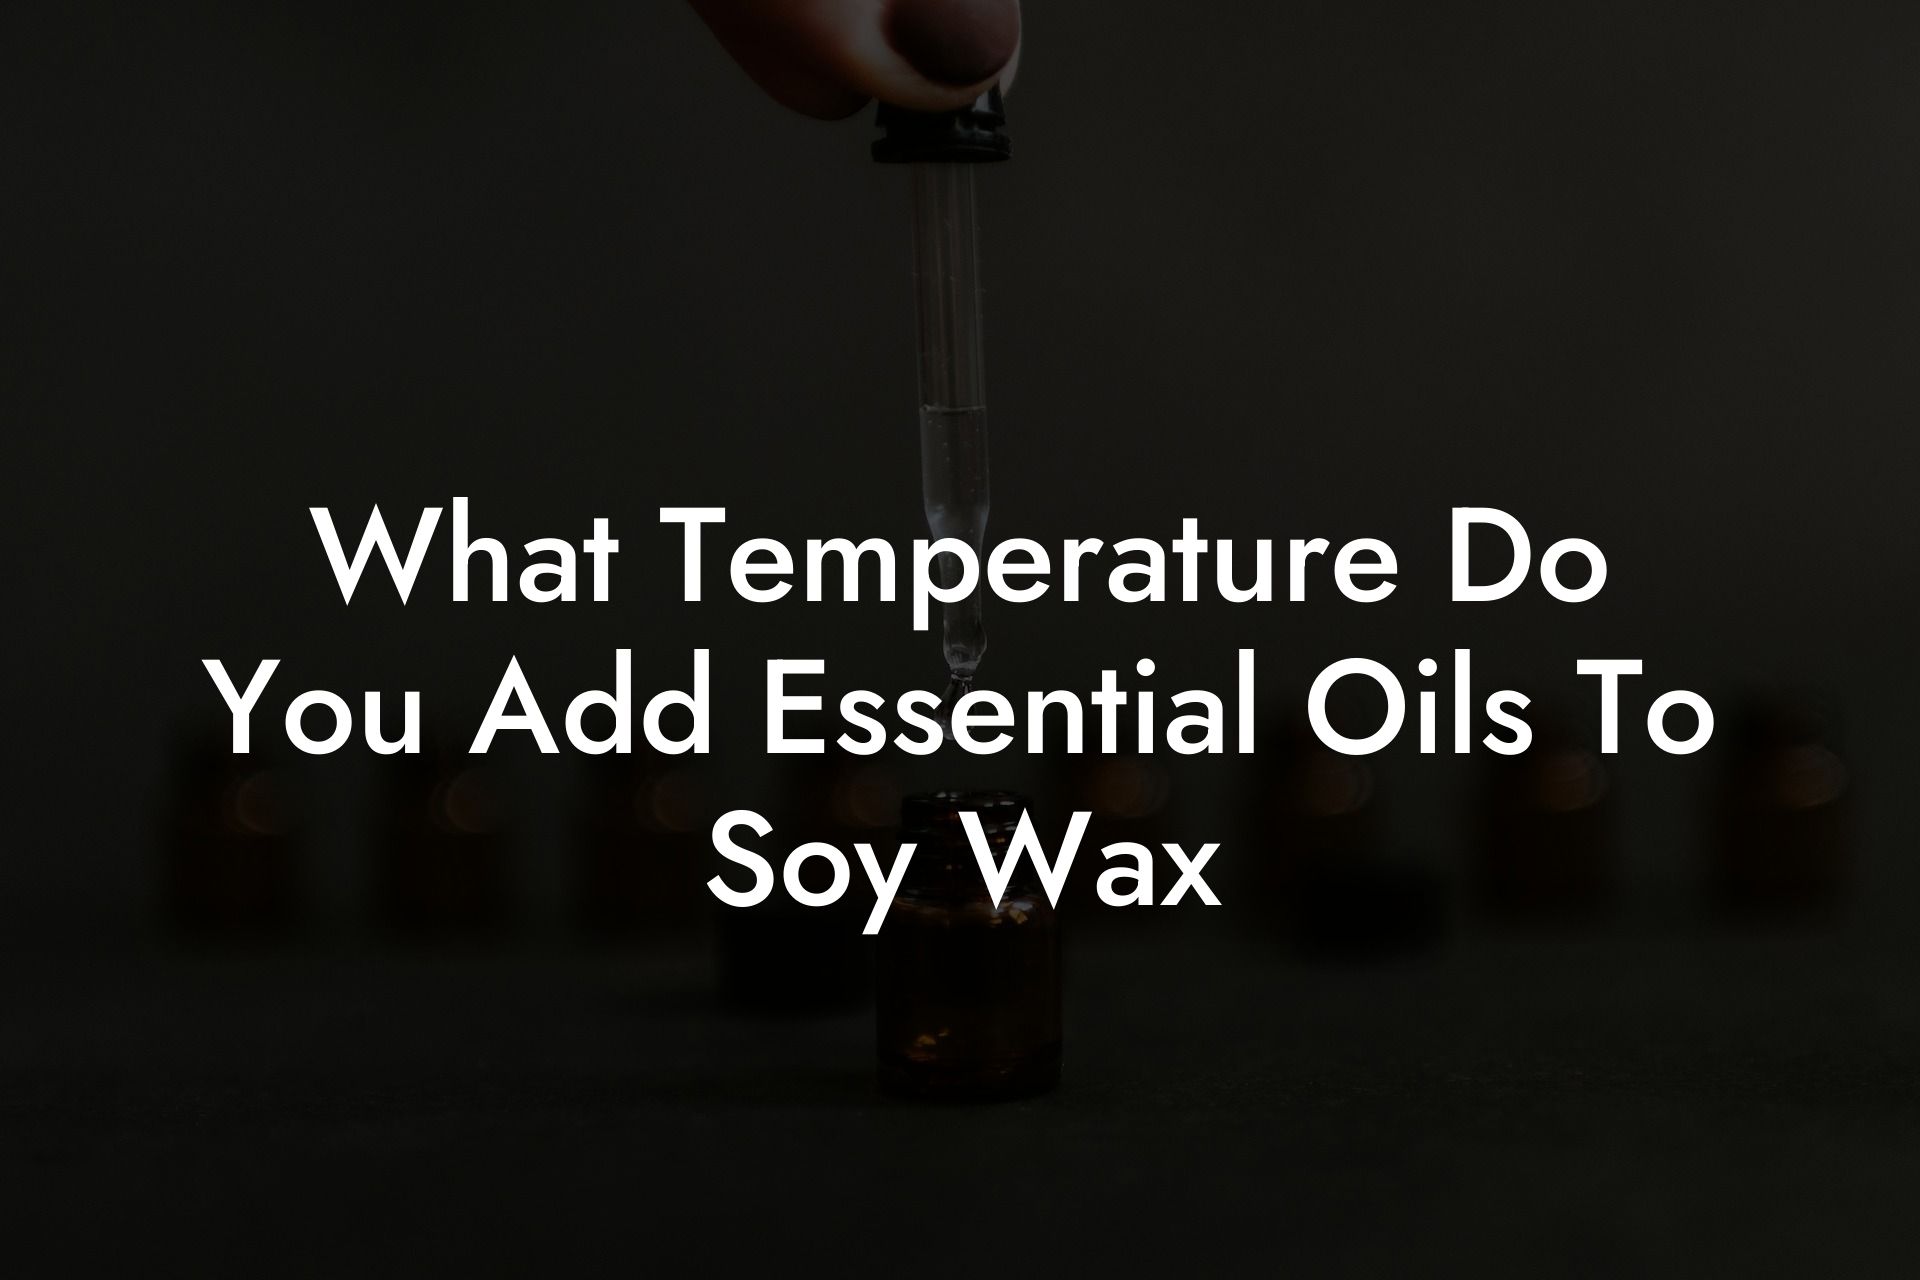 What Temperature Do You Add Essential Oils To Soy Wax